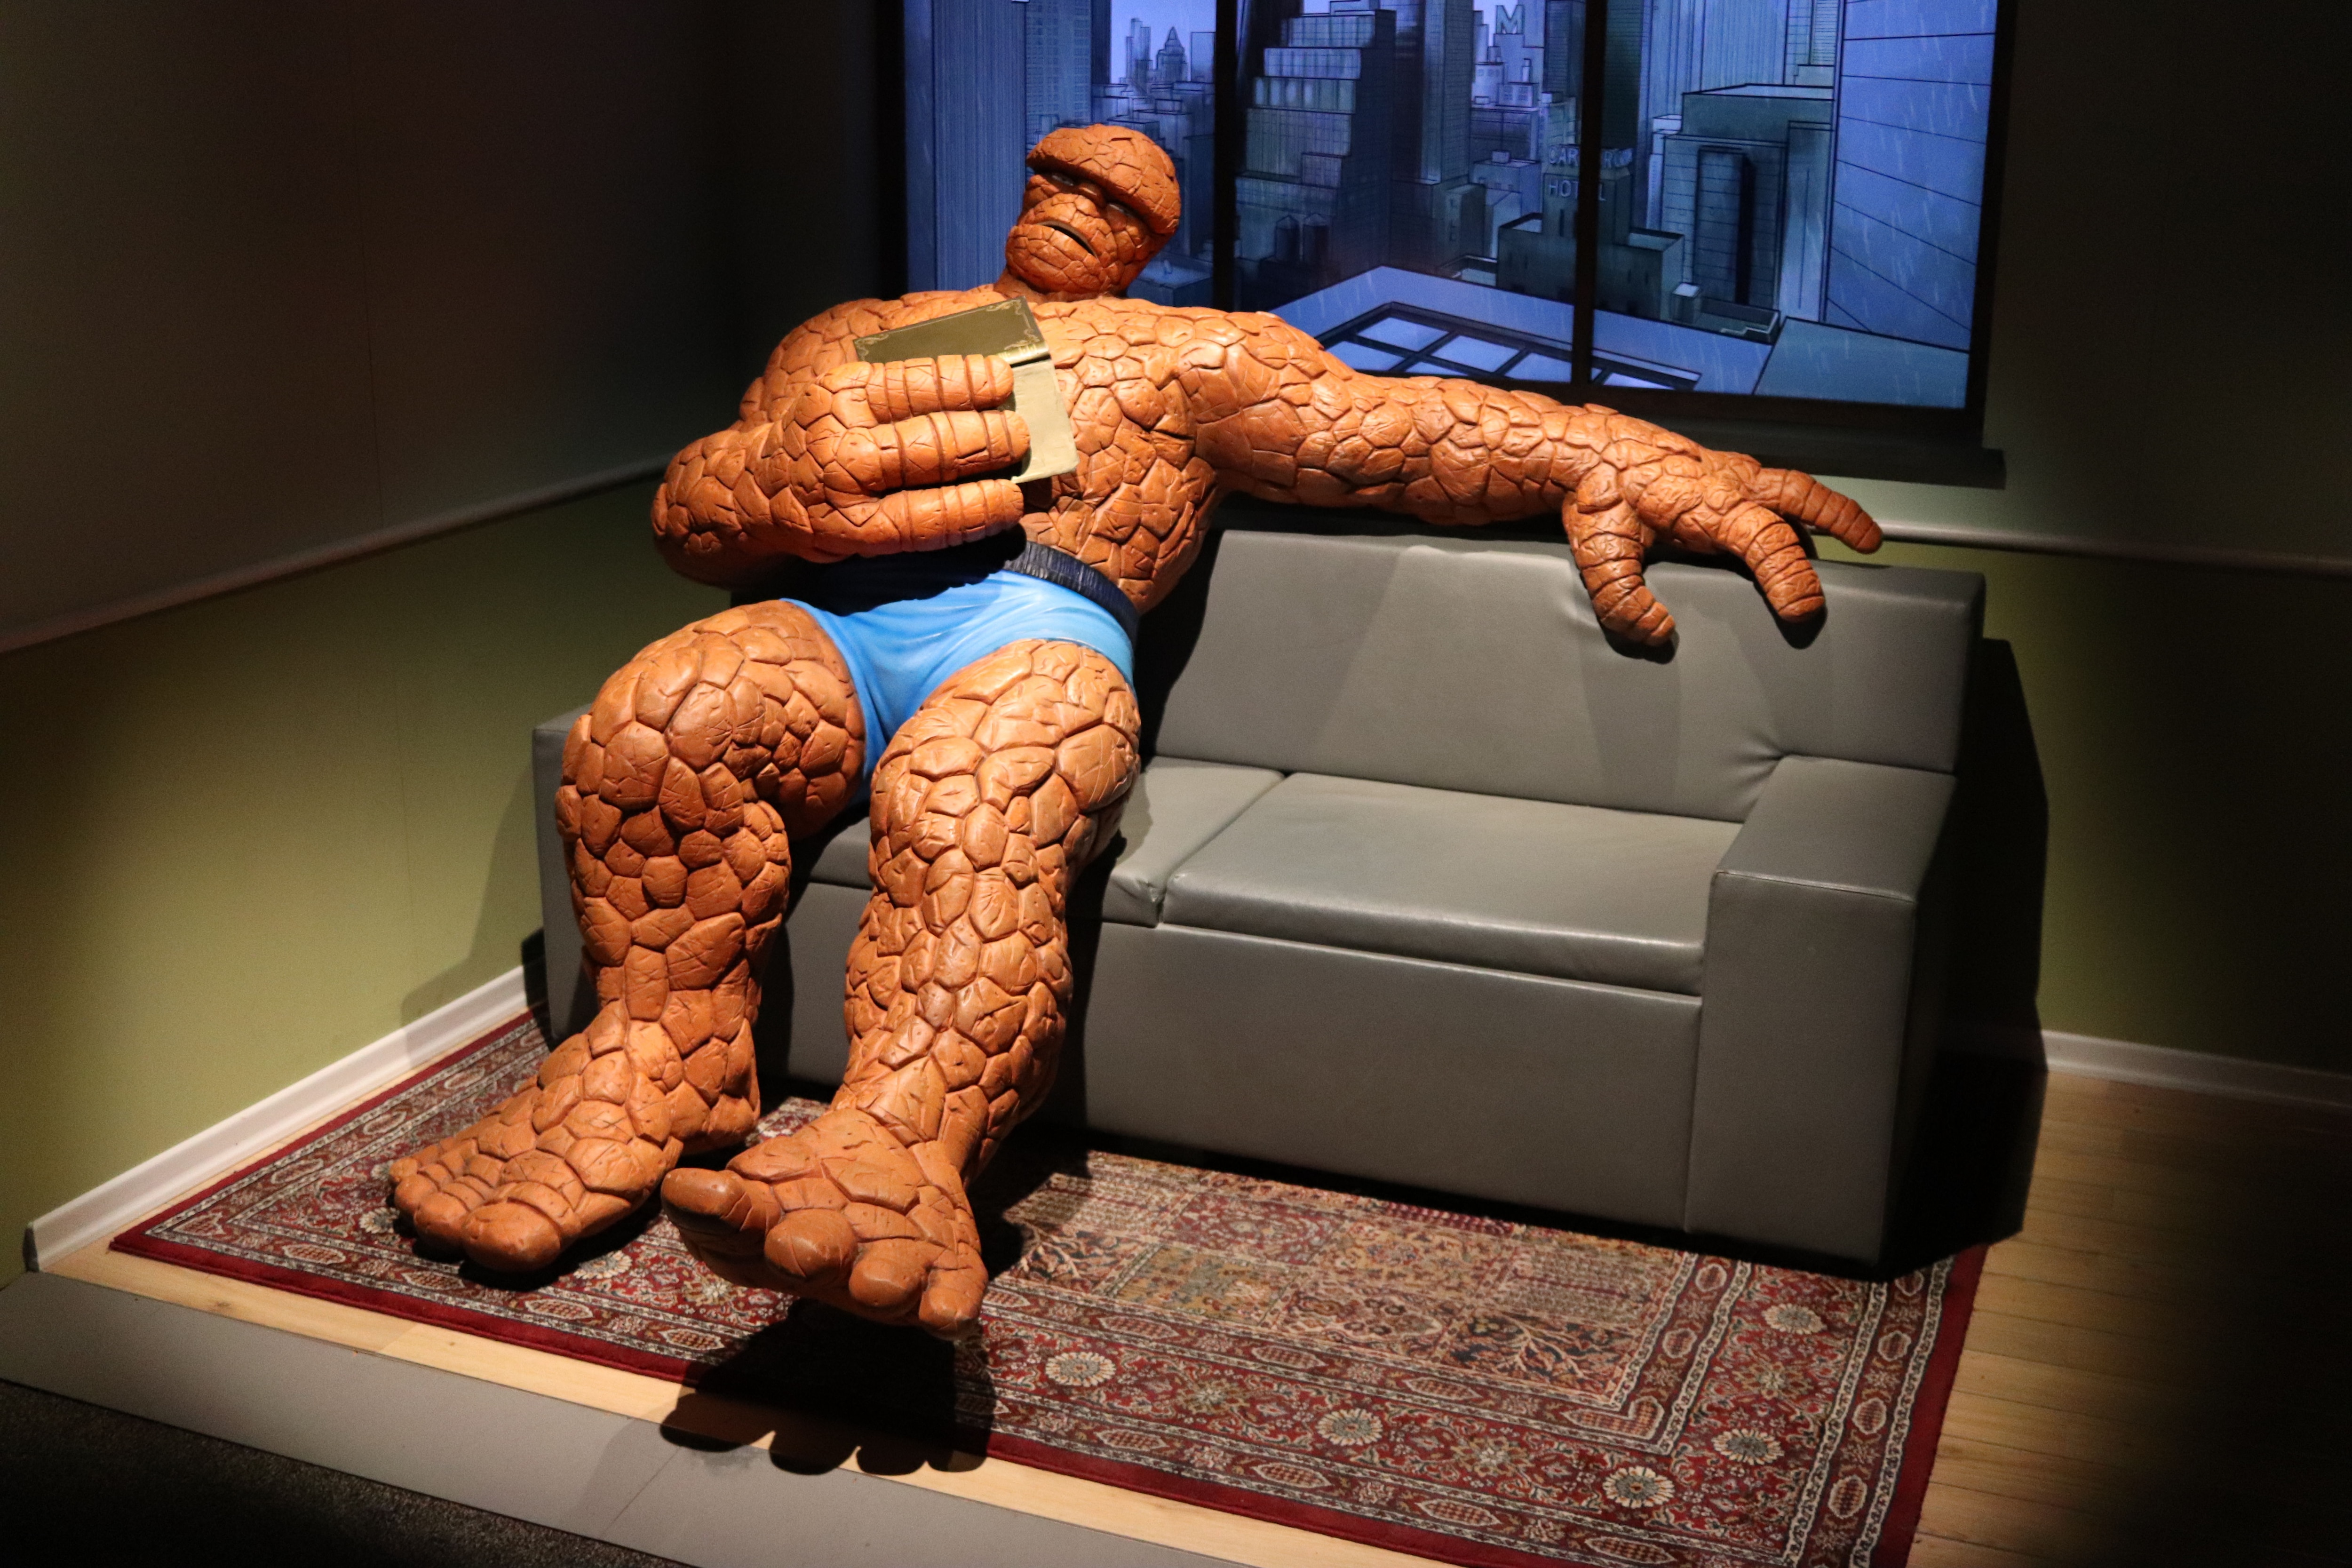 The Thing at Marvel exhibit Franklin Institute